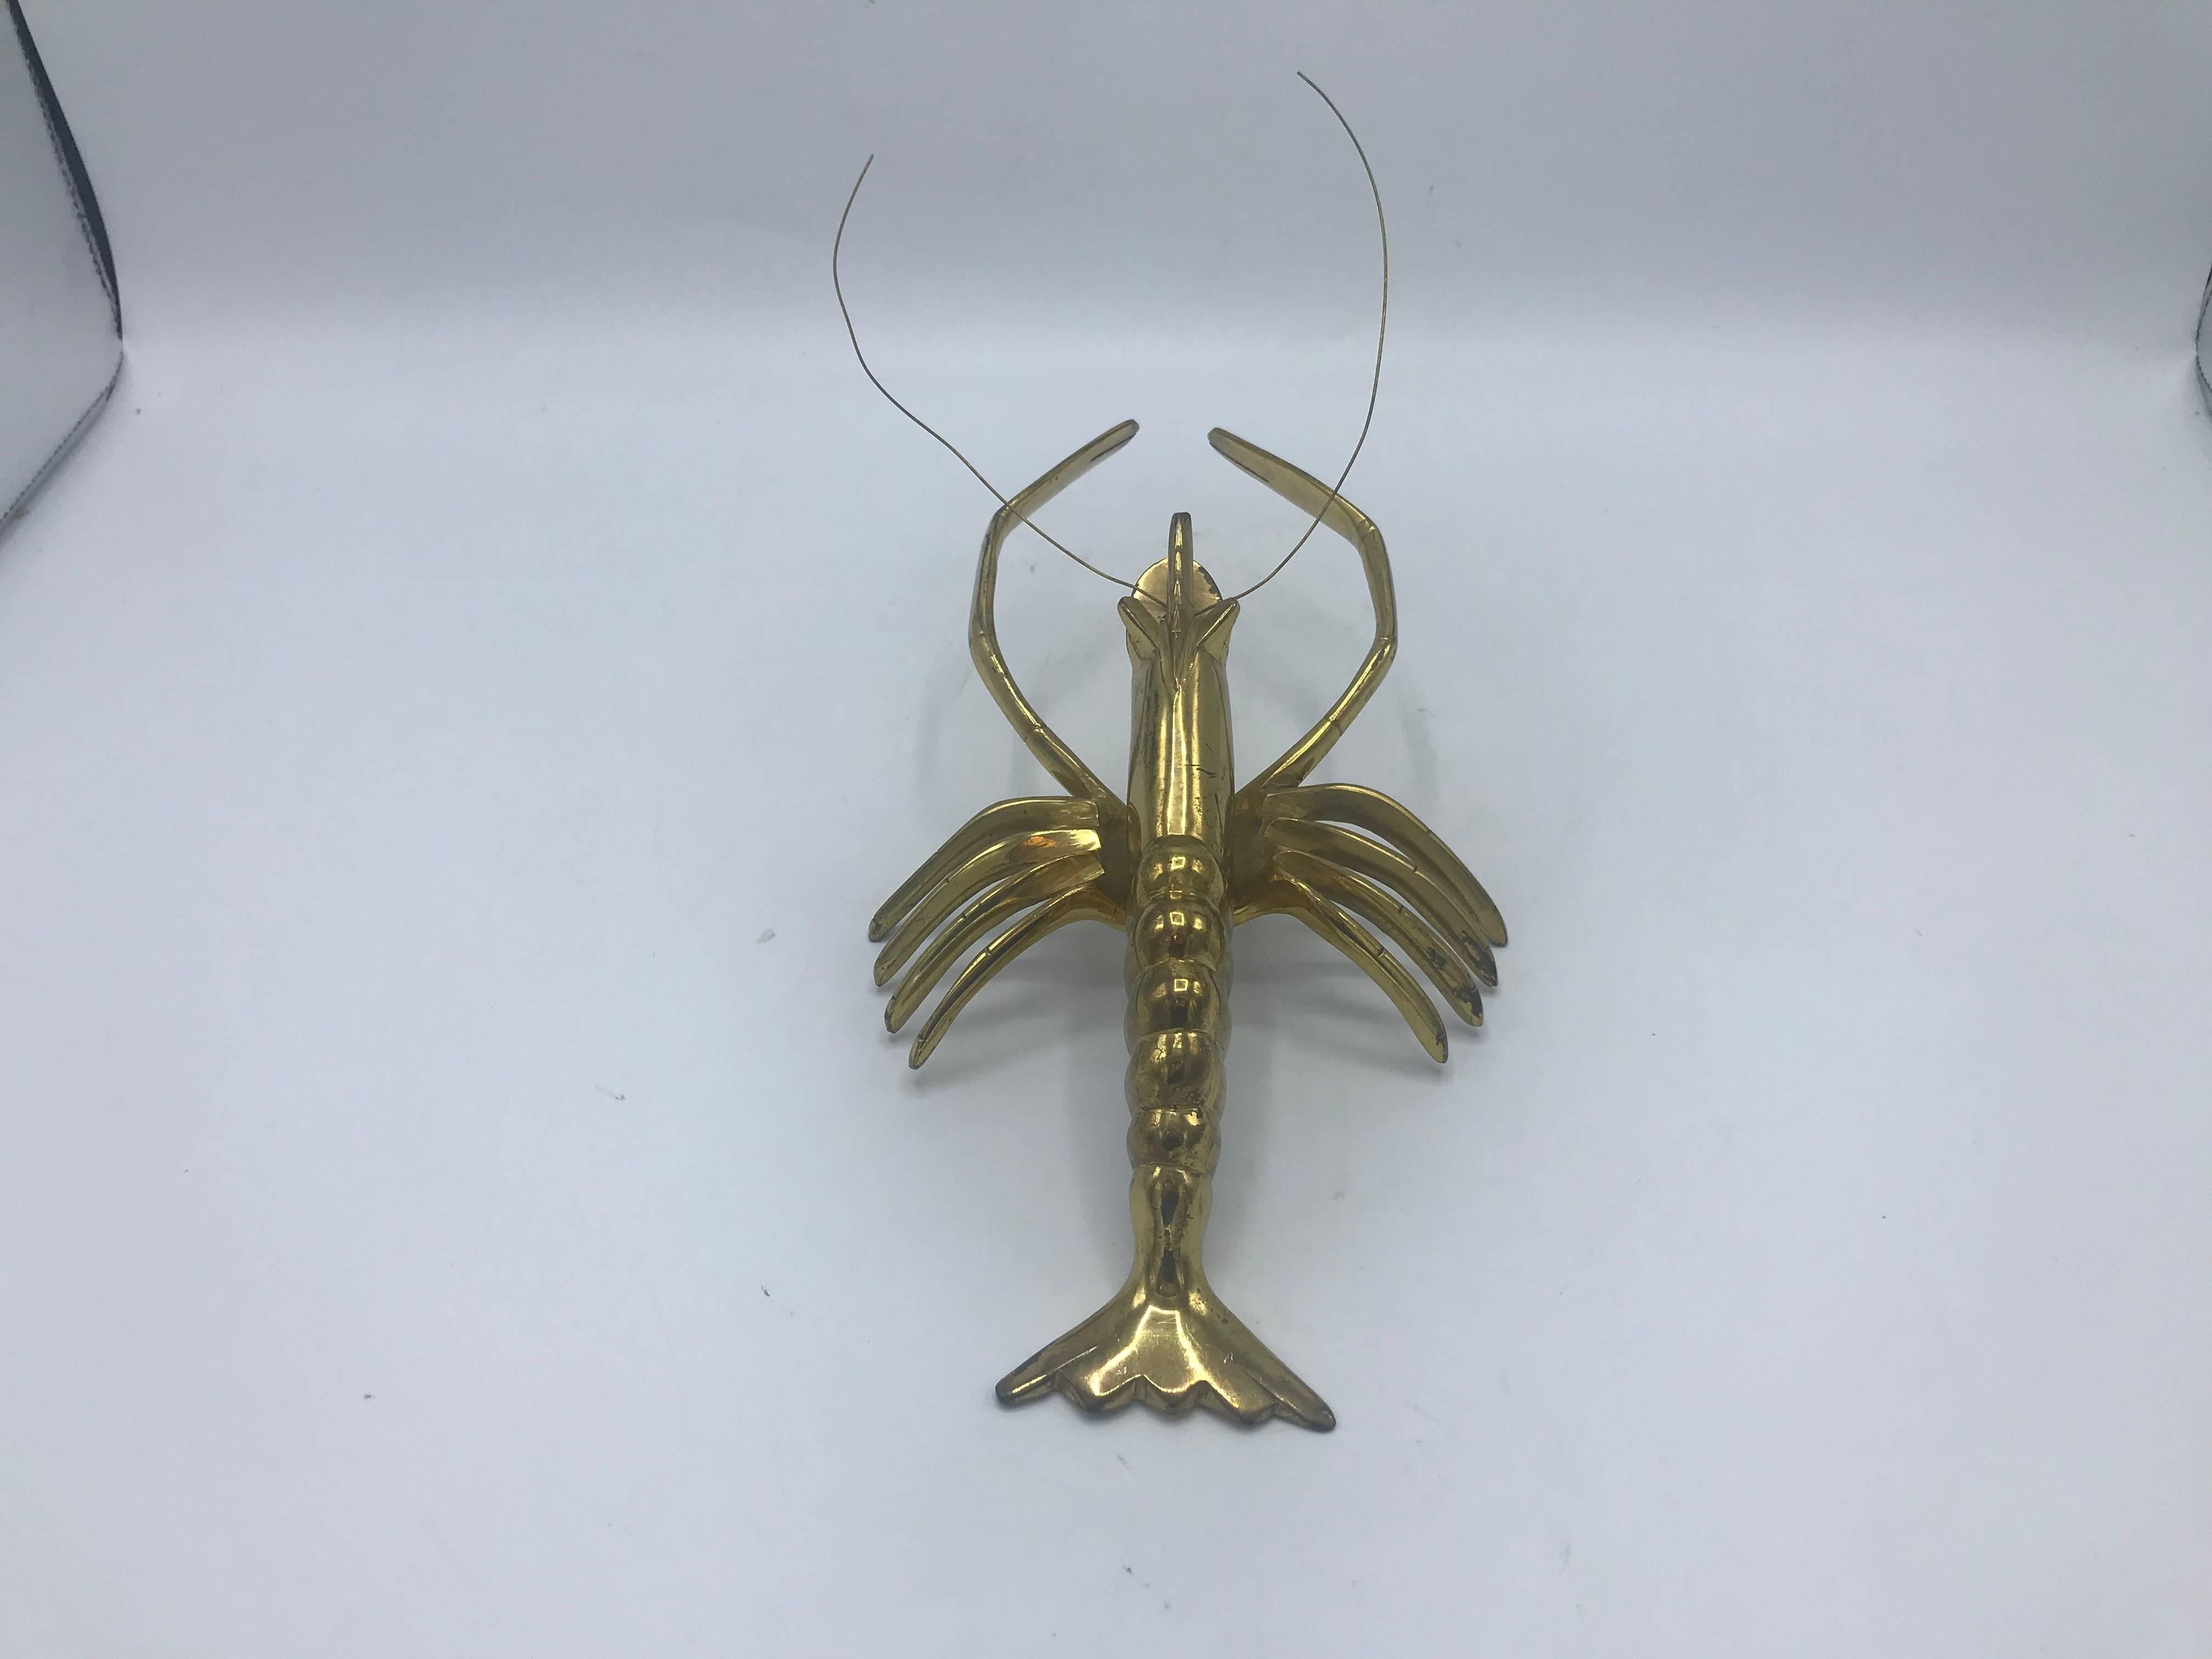 Offered is a beautiful, 1960s Italian brass lobster sculpture. The piece is fairly heavy for its size. Antennas can be moved, trimmed, or replaced.